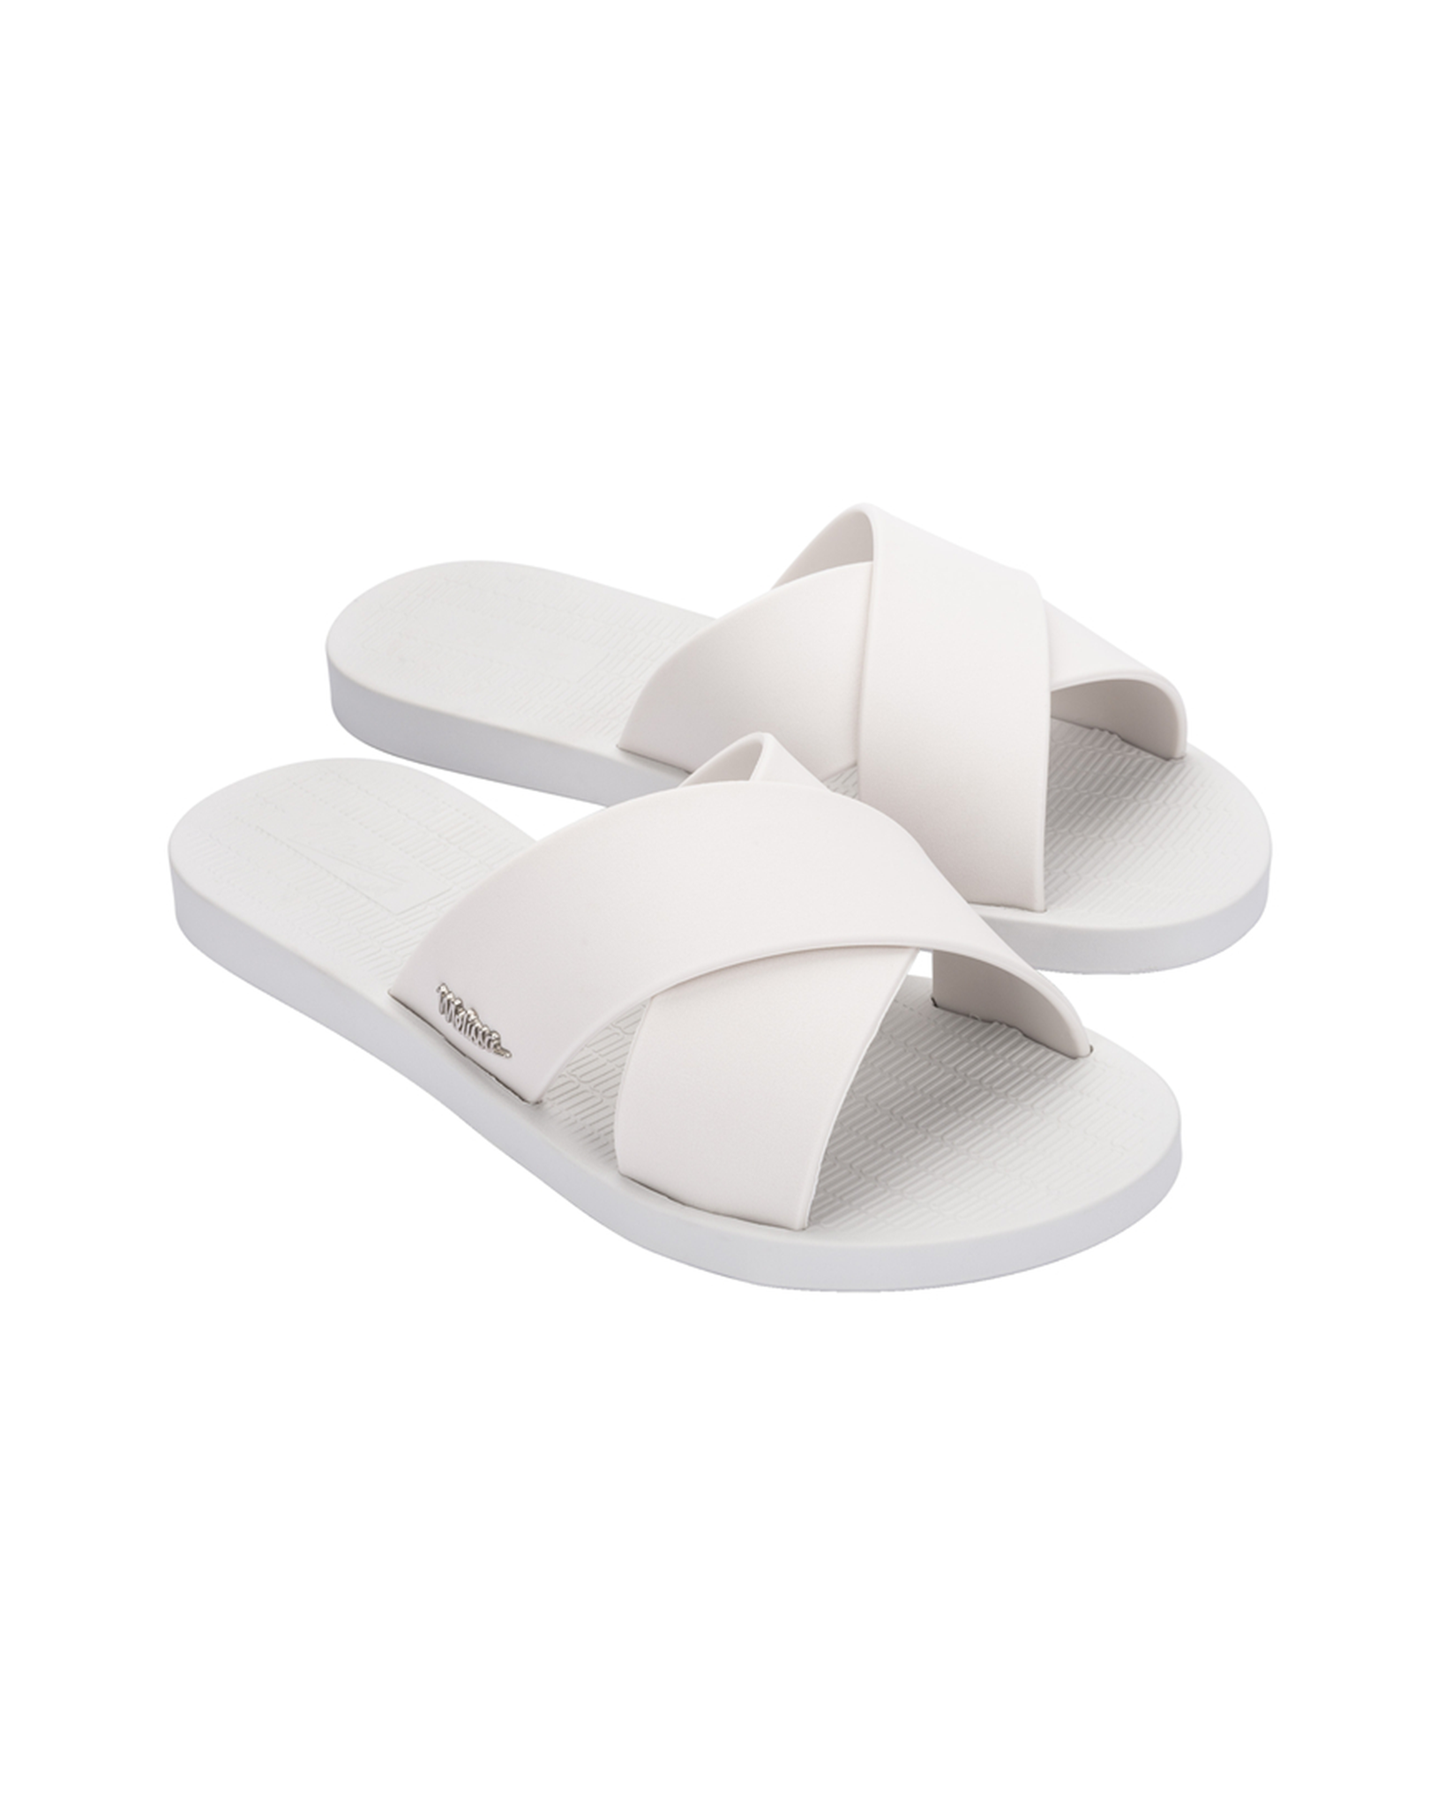 Melissa Sandals in White Color